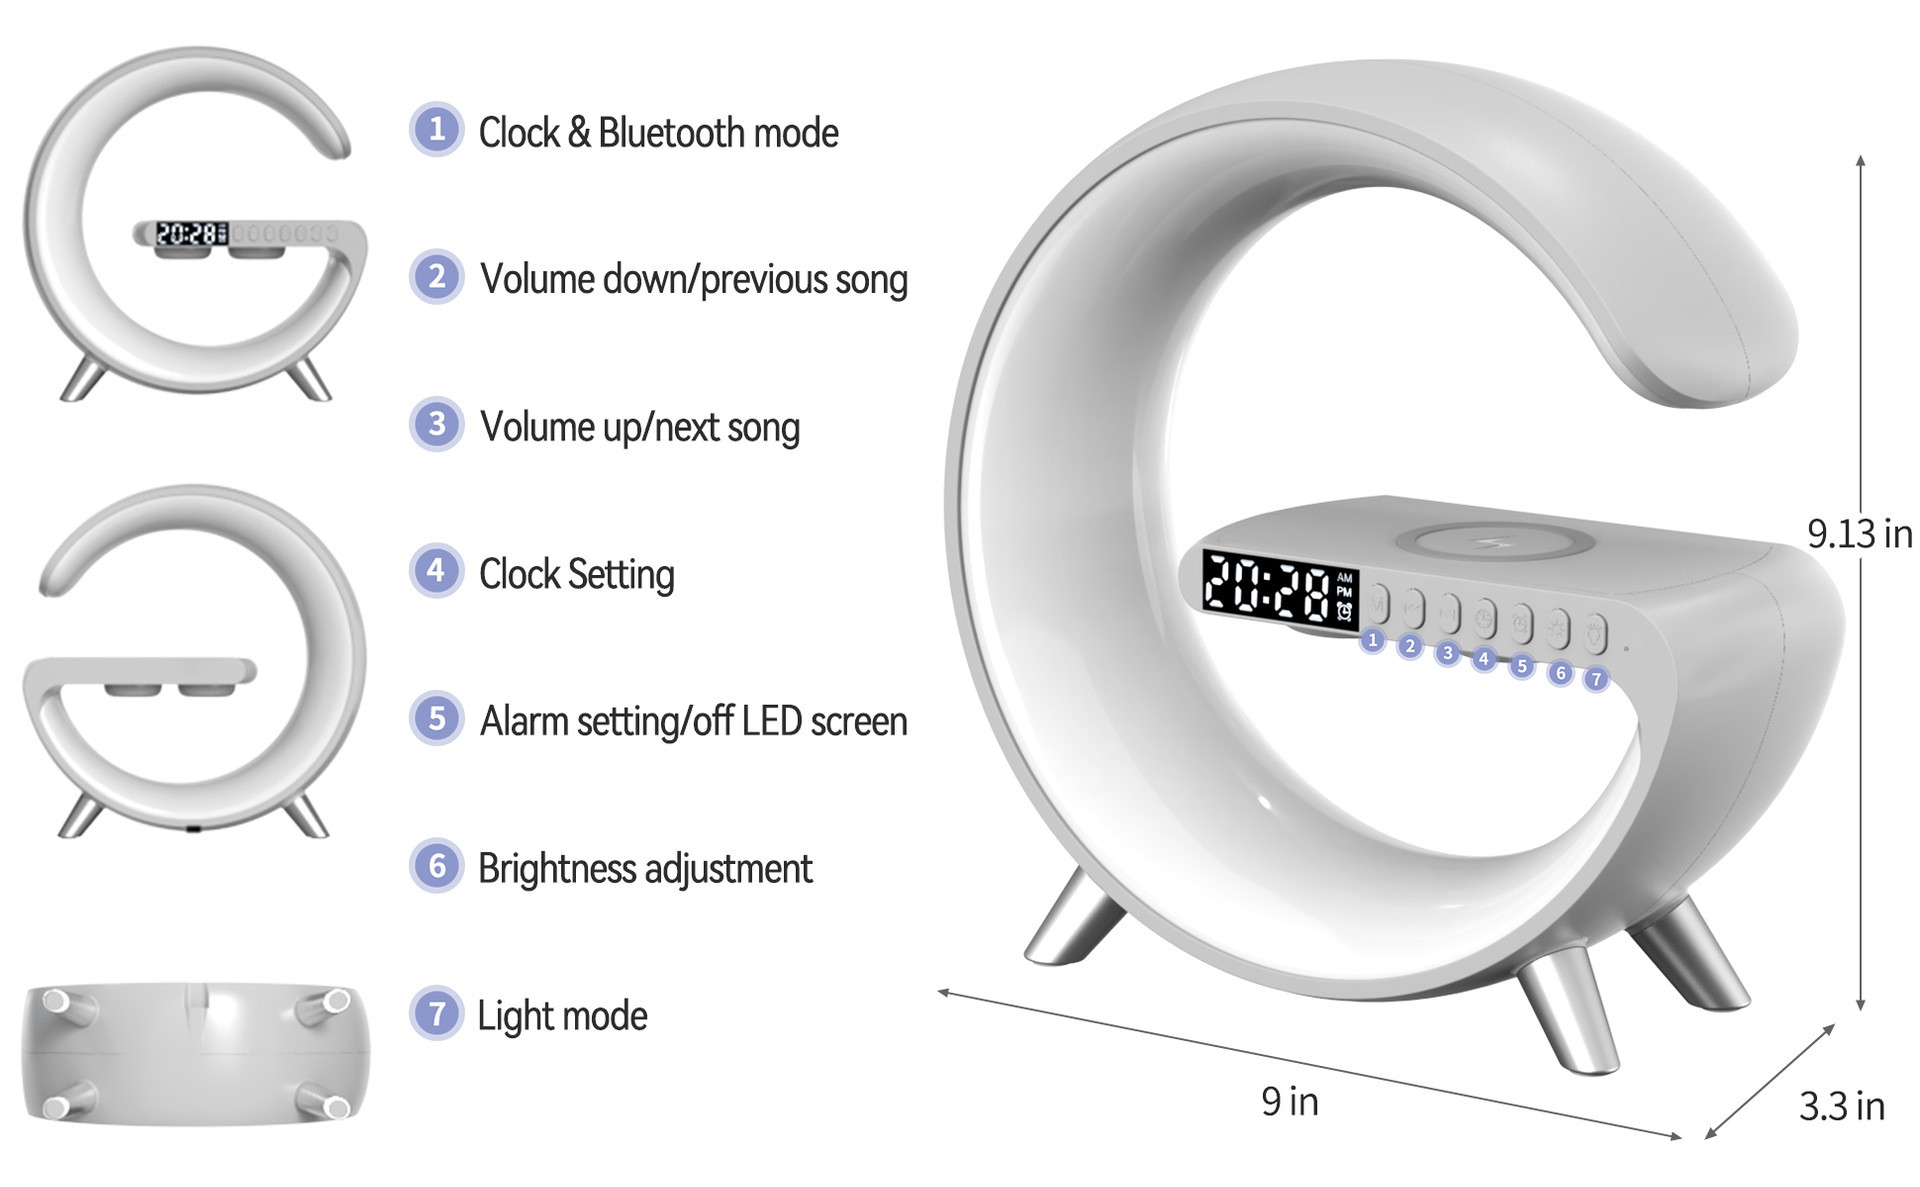 Multifunction wireless charger speaker light  specifications